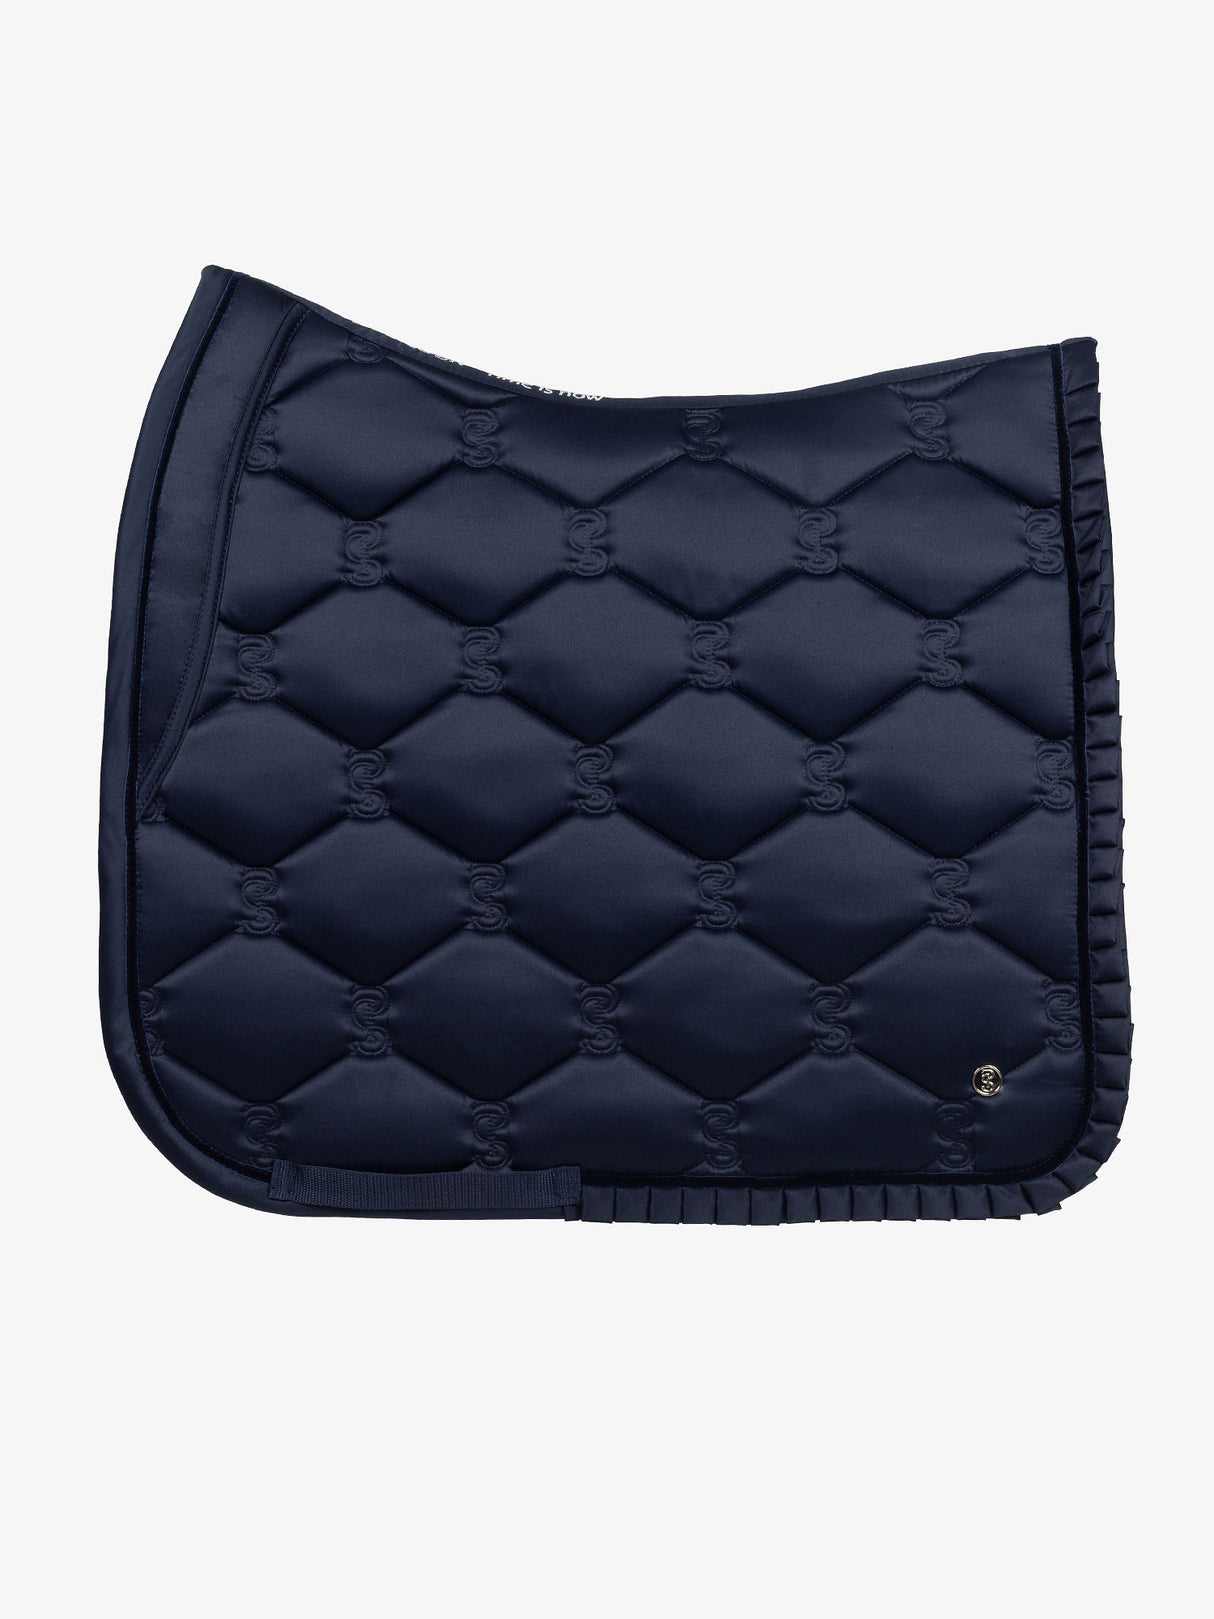 PS of Sweden Ruffle Dressage Saddle Pad Navy